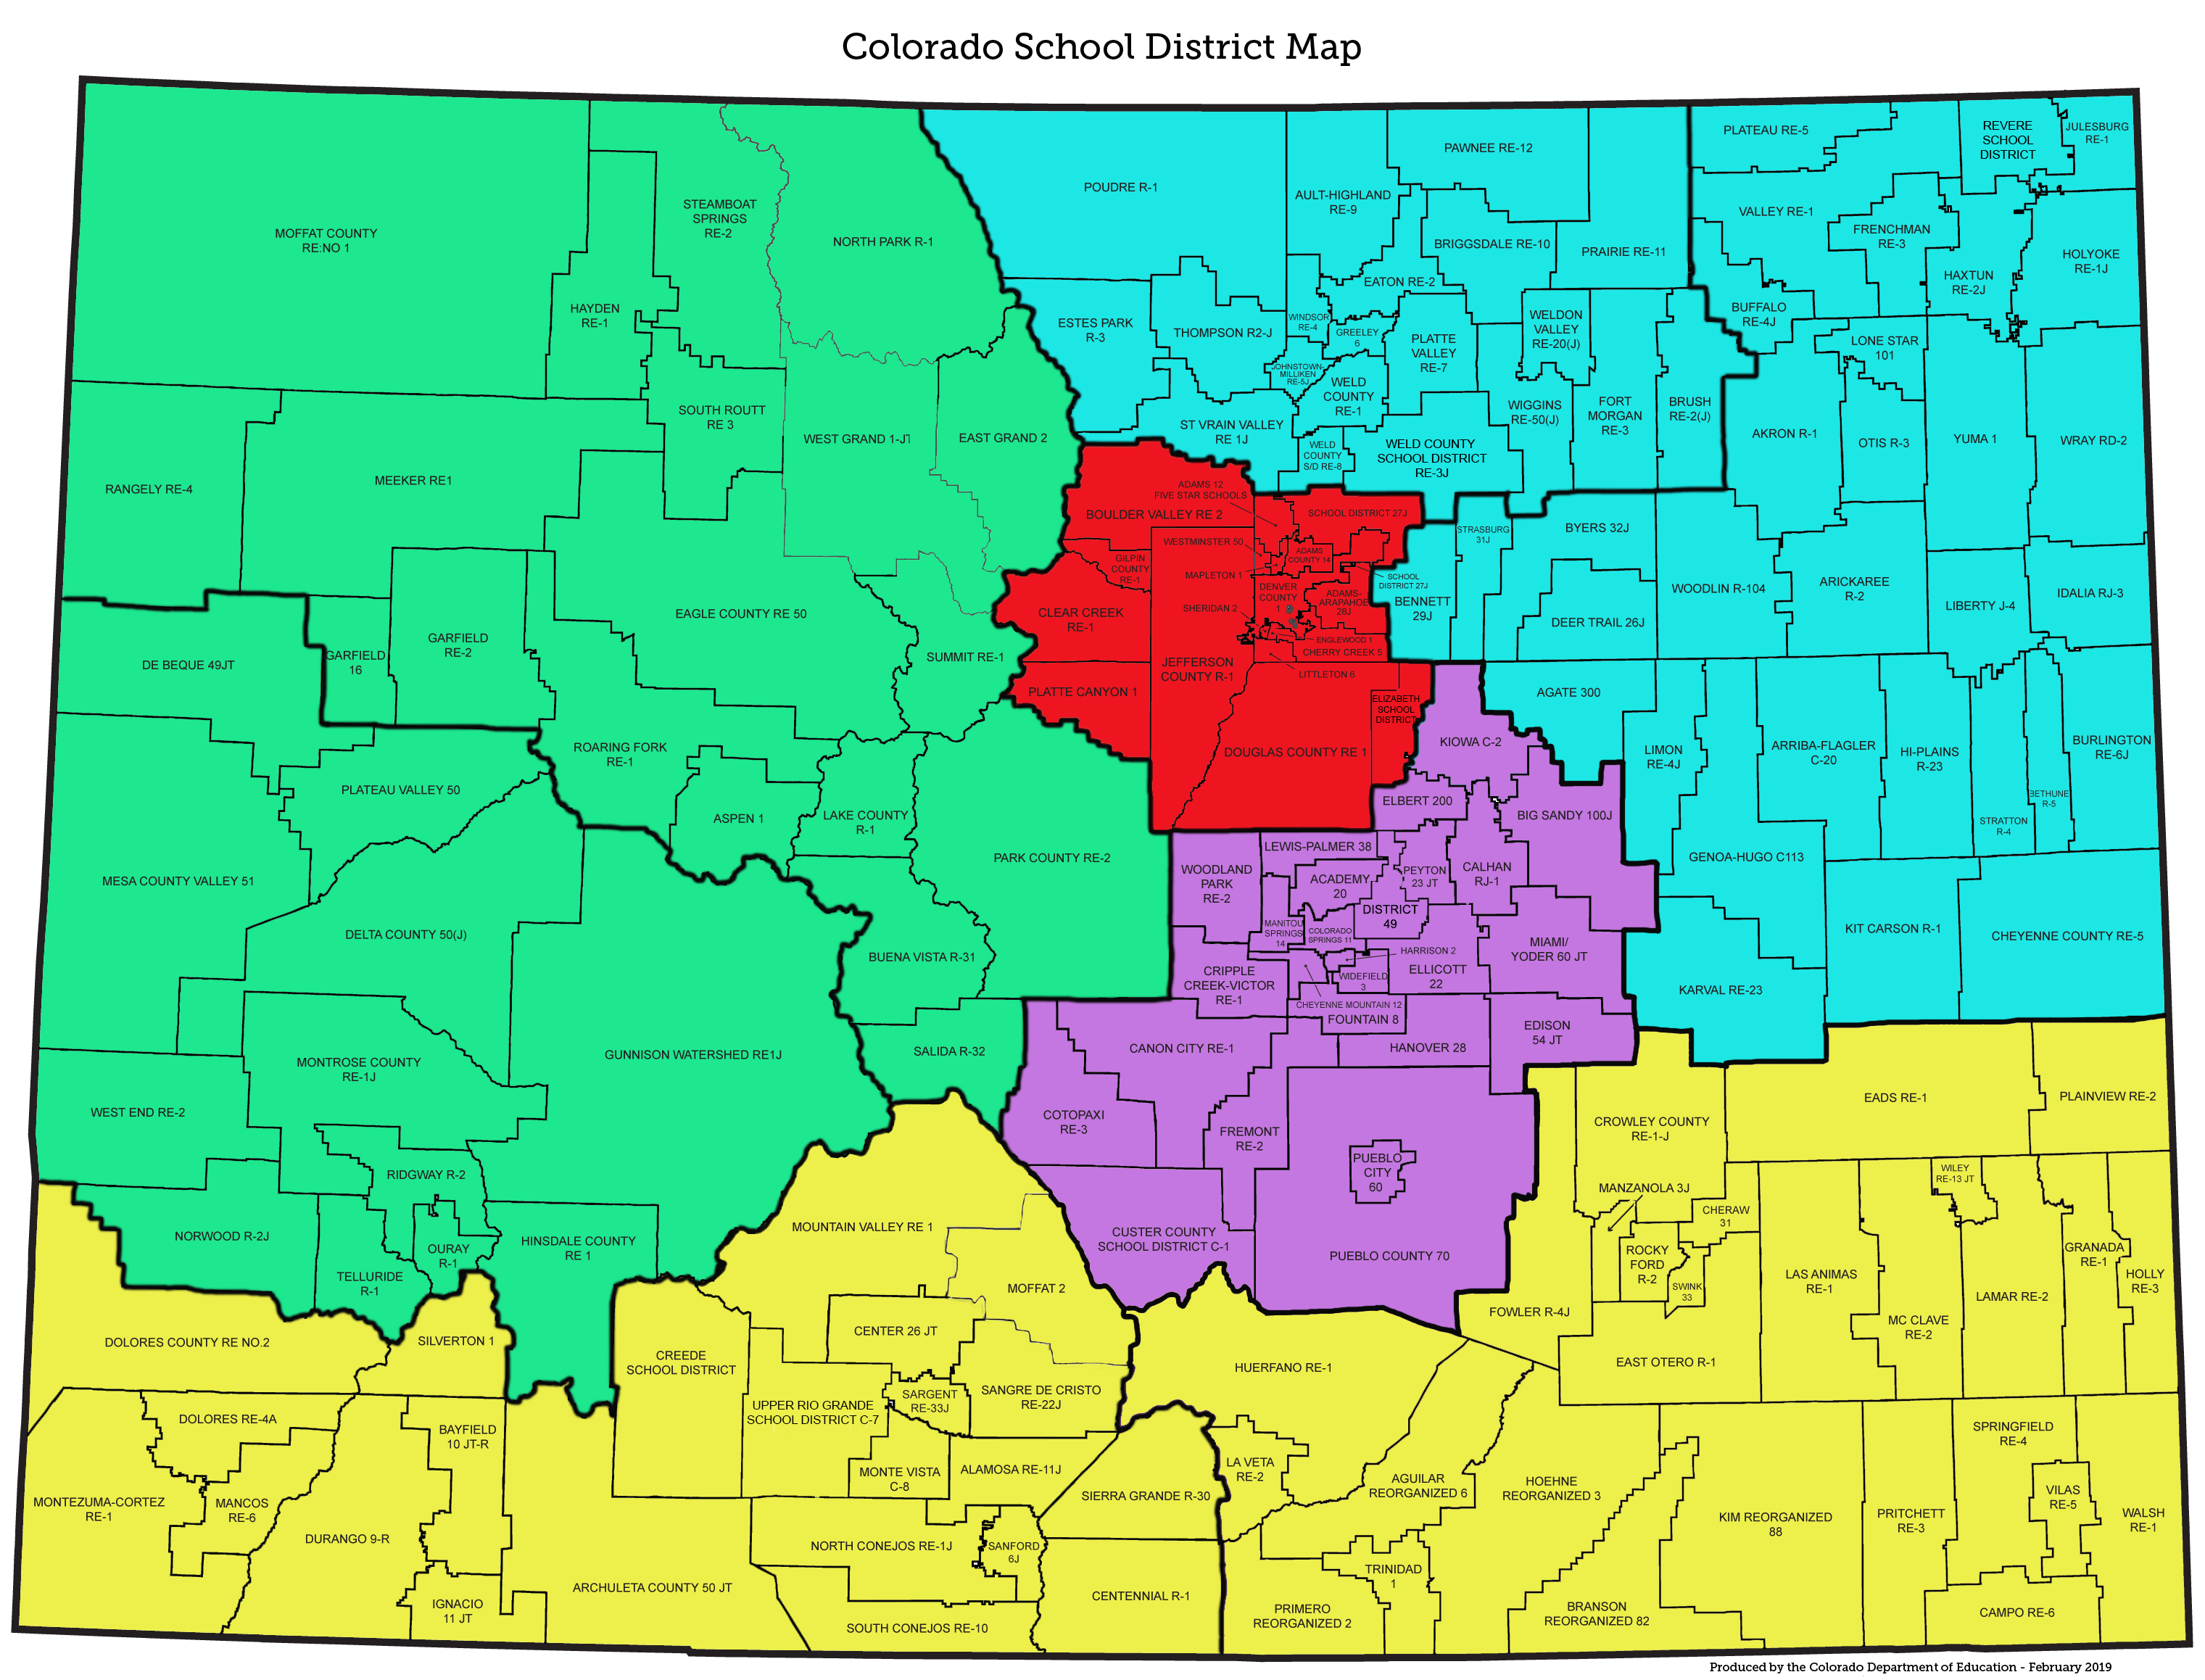 Colorado school district map, broken out by regional contact assignments.